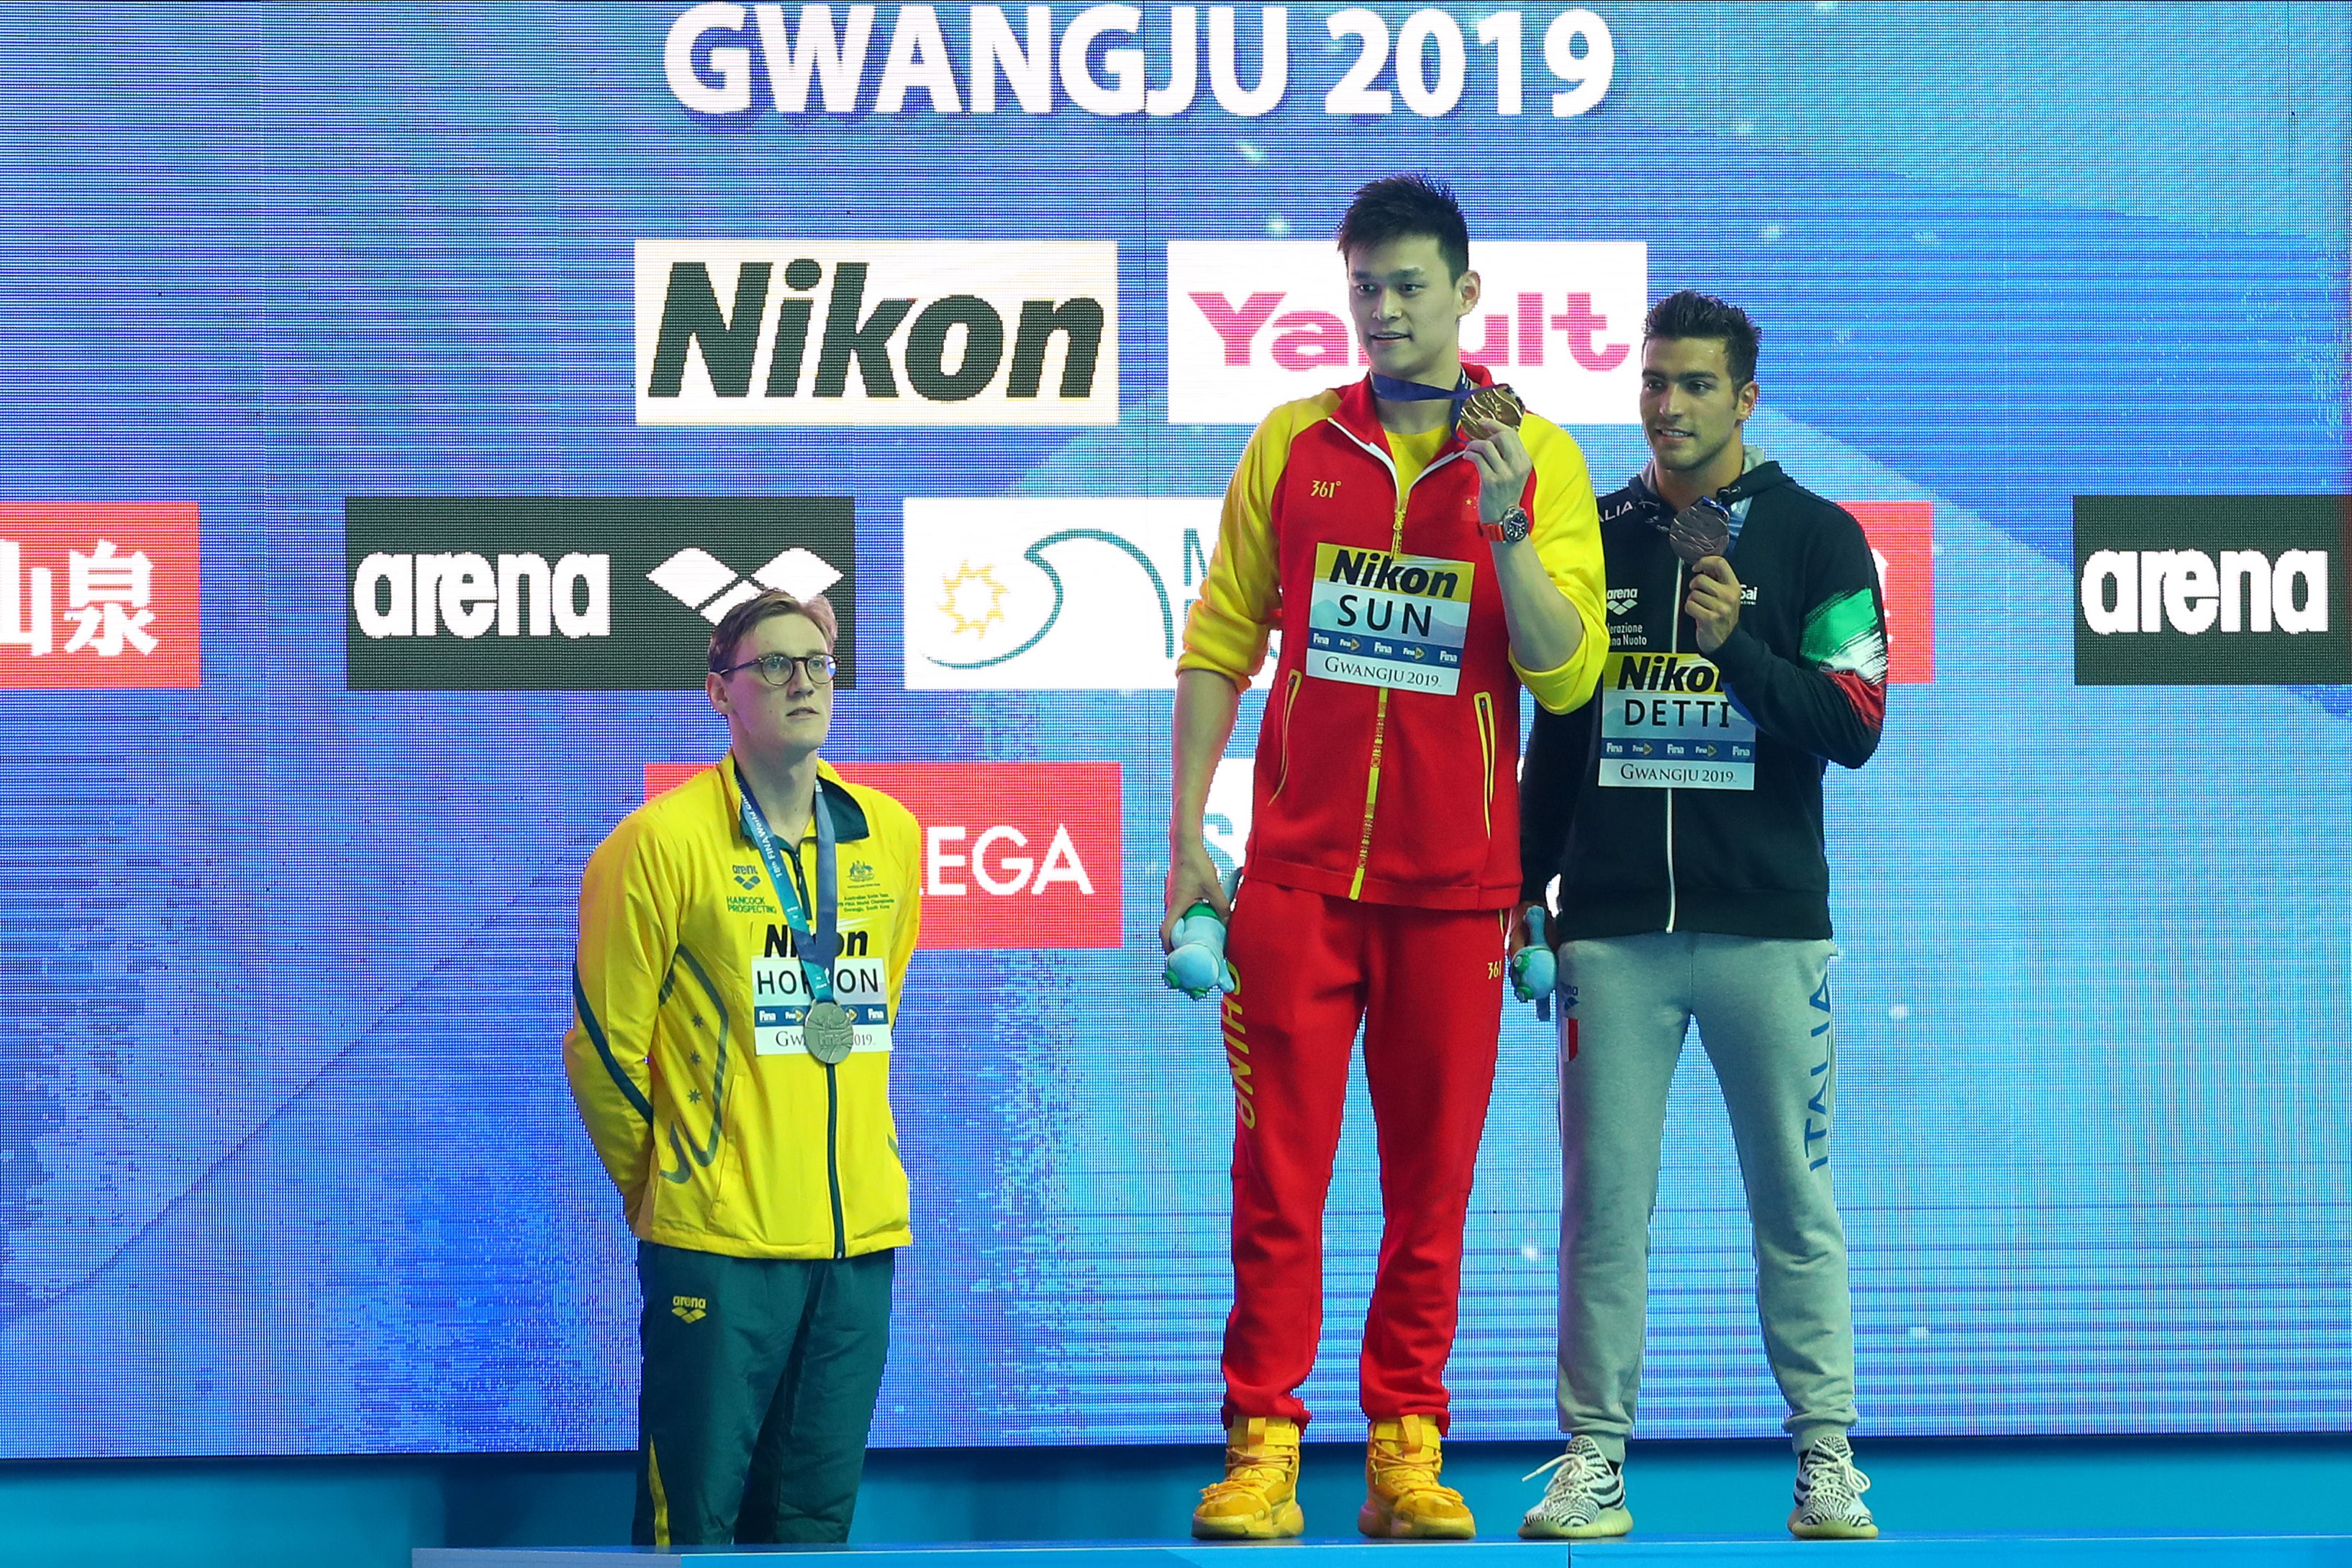 Rivals refused to stand on the podium with Sun Yang at the 2019 World Championships